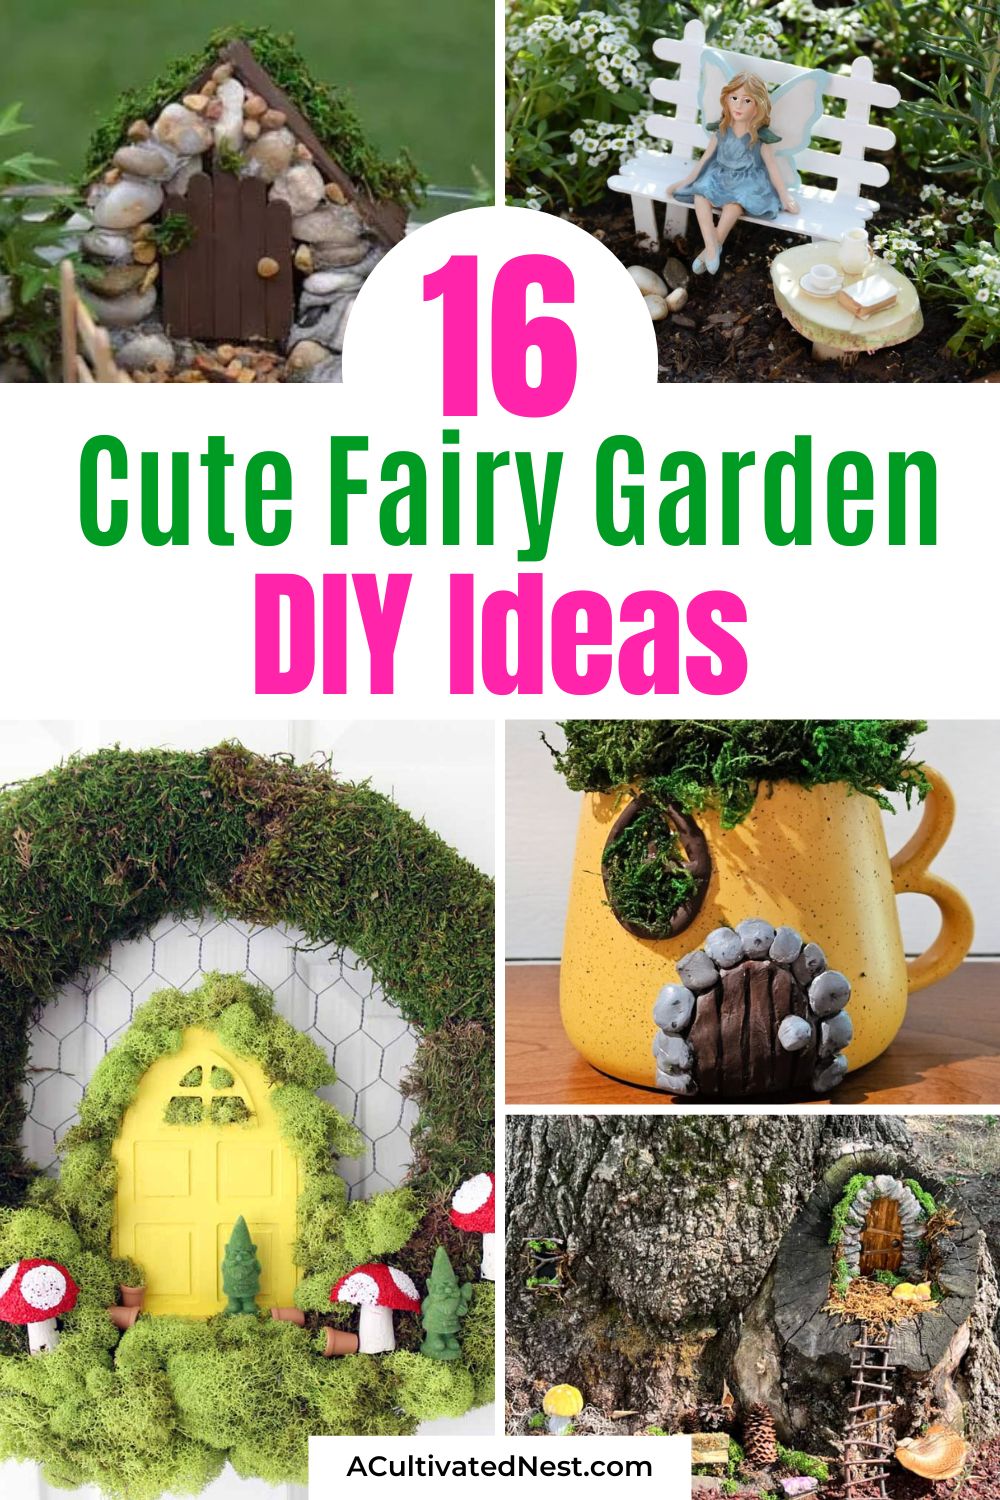 16 Cute Fairy Garden DIY Ideas- Transform your garden into a fairy-tale wonderland! Explore creative and budget-friendly fairy garden DIY ideas that add charm and magic to any outdoor space. From tiny chairs to magical doors—it's time to craft your own little world! | #fairyGardenDIY #diyProjects #craftIdeas #crafting #ACultivatedNest